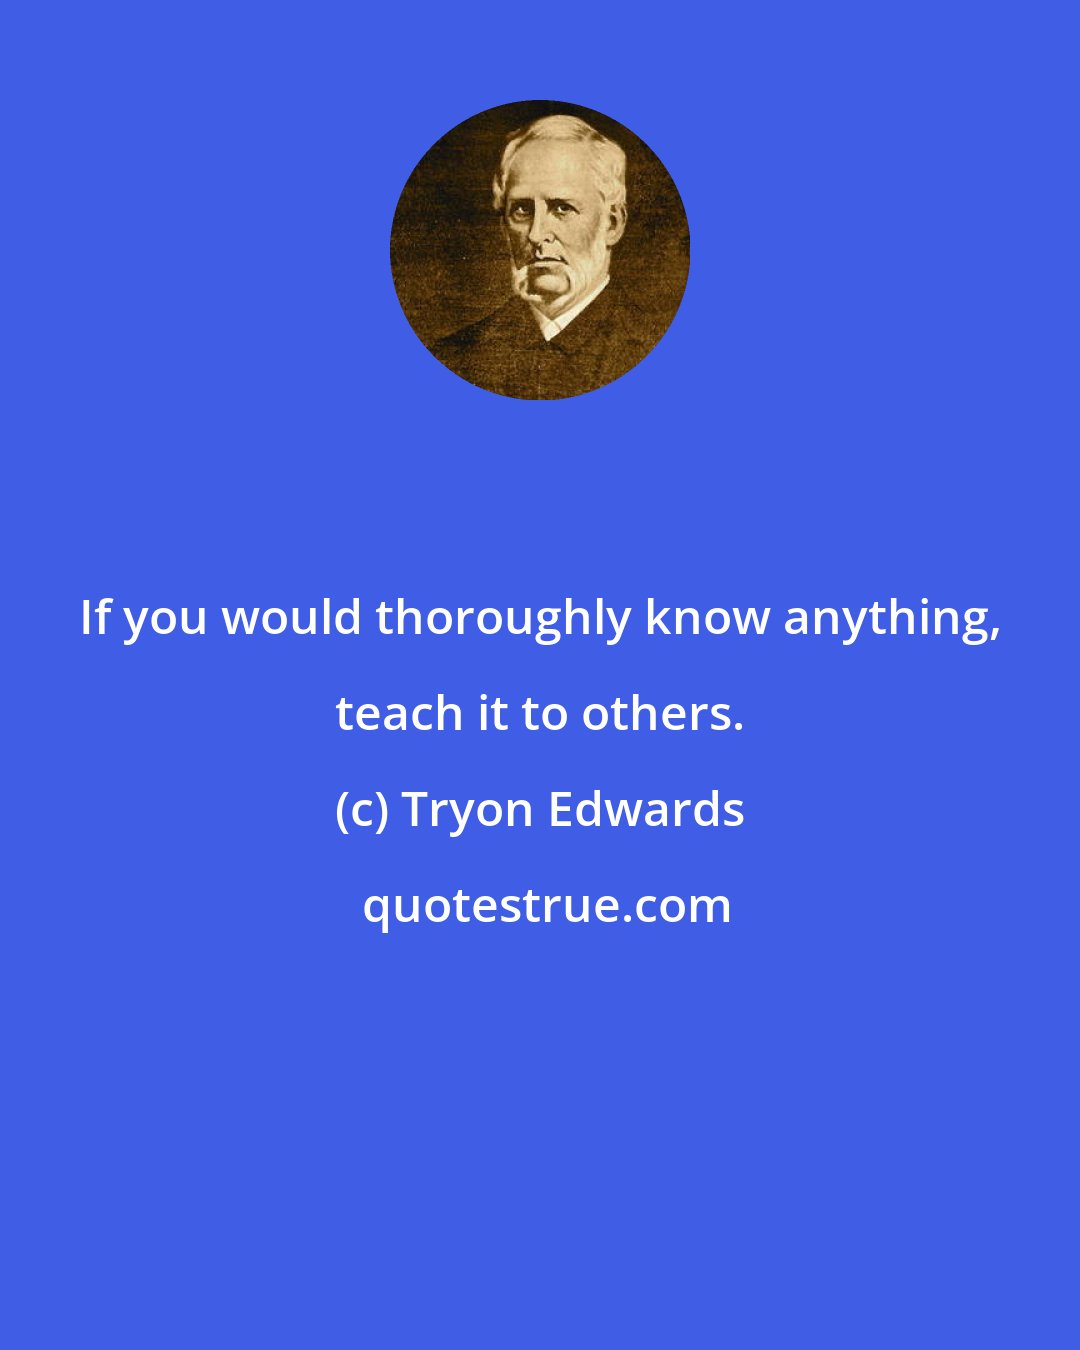 Tryon Edwards: If you would thoroughly know anything, teach it to others.